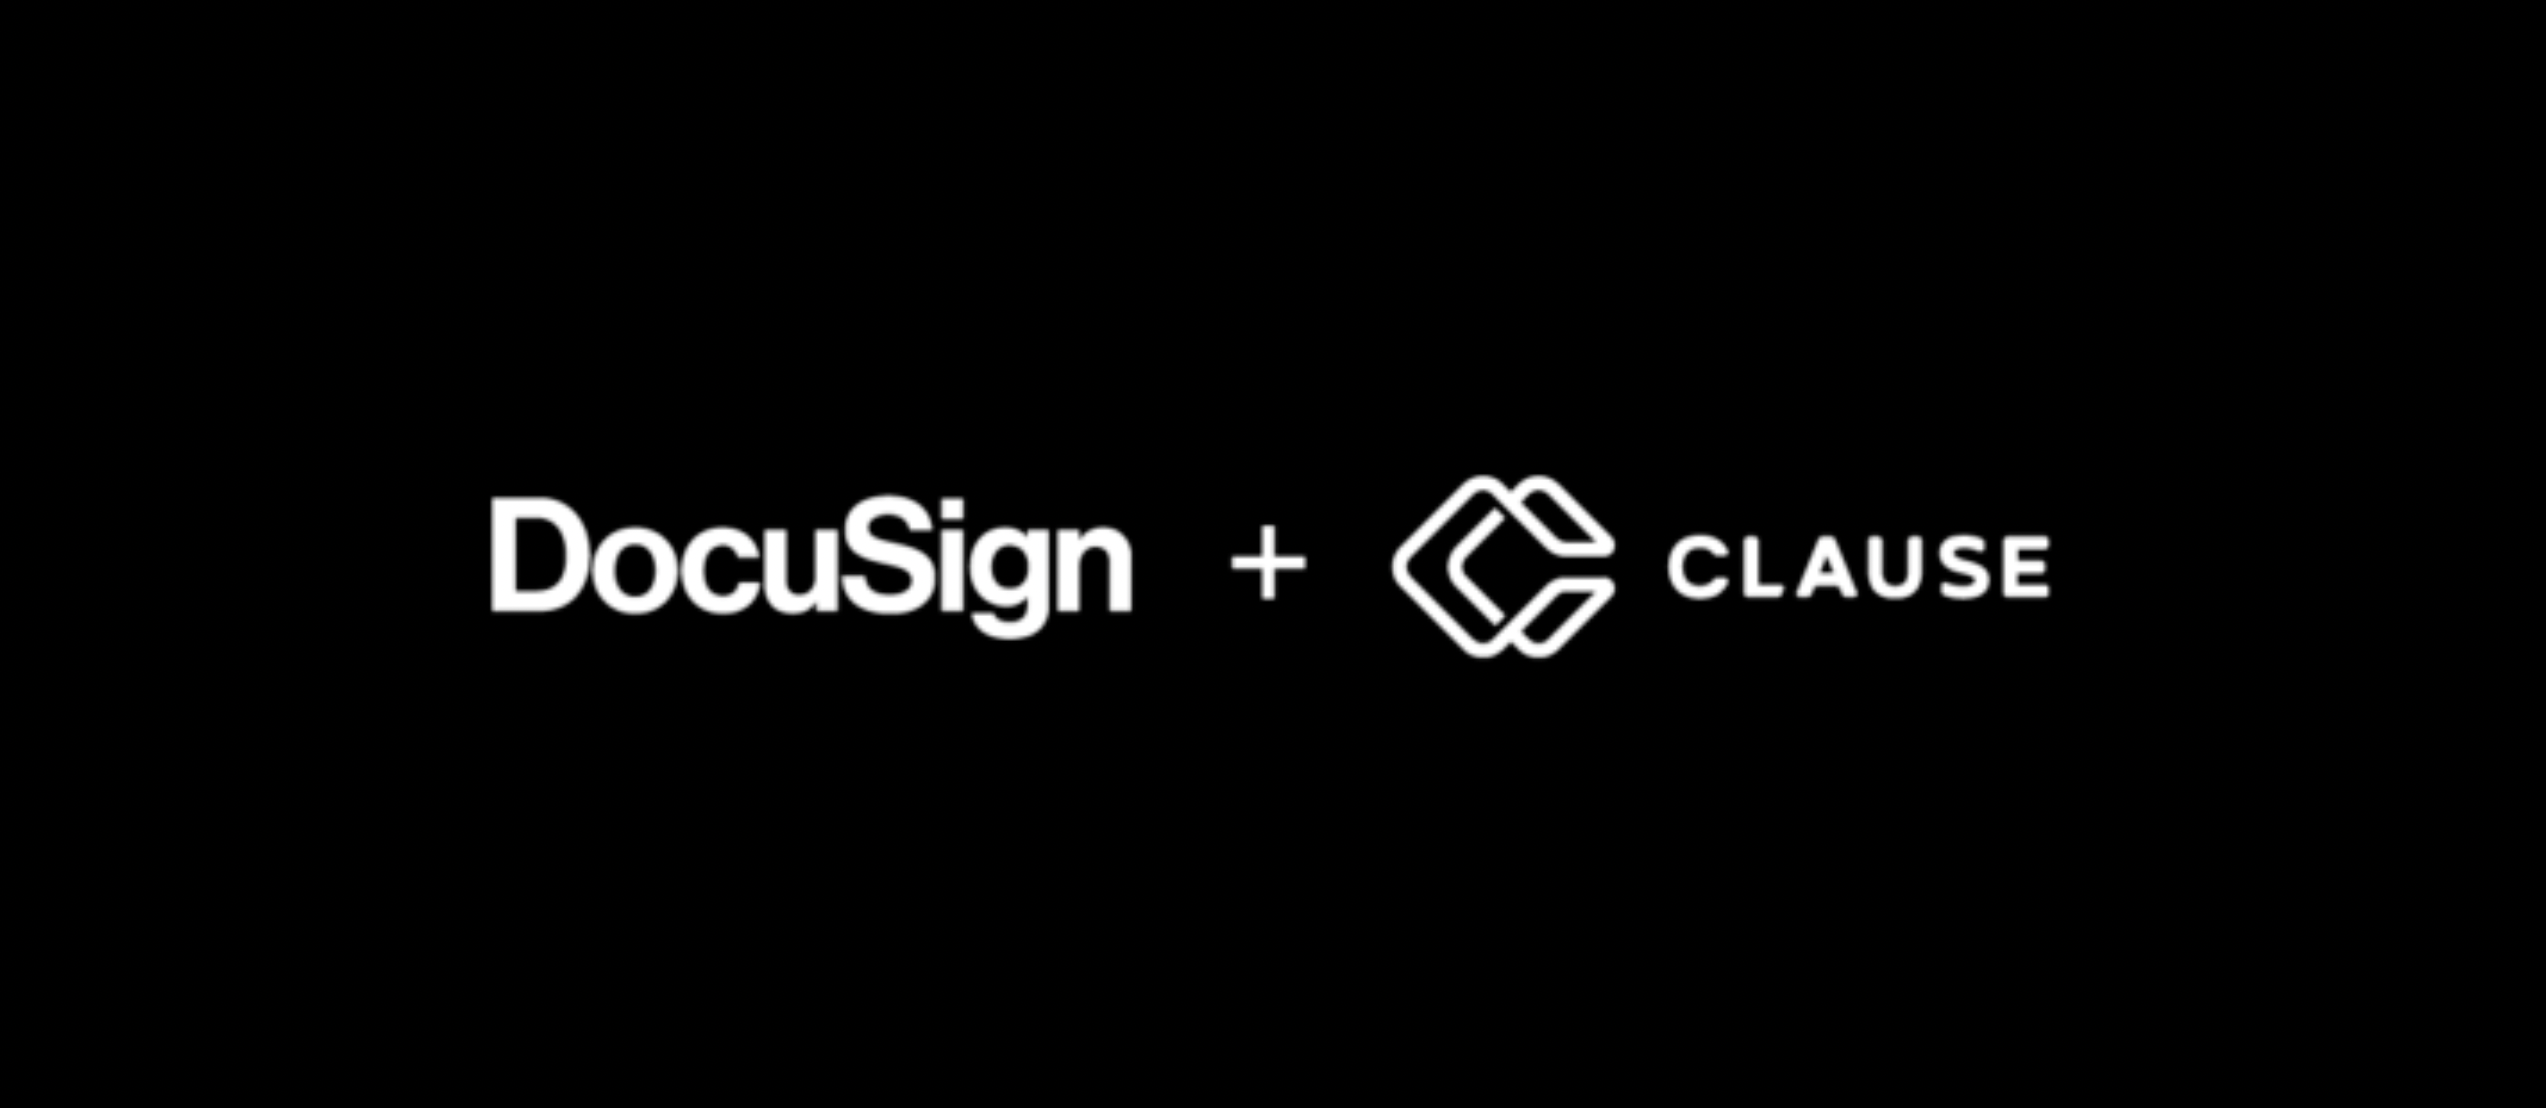 DocuSign Announces Acquisition of Clause to Develop Smart Agreements